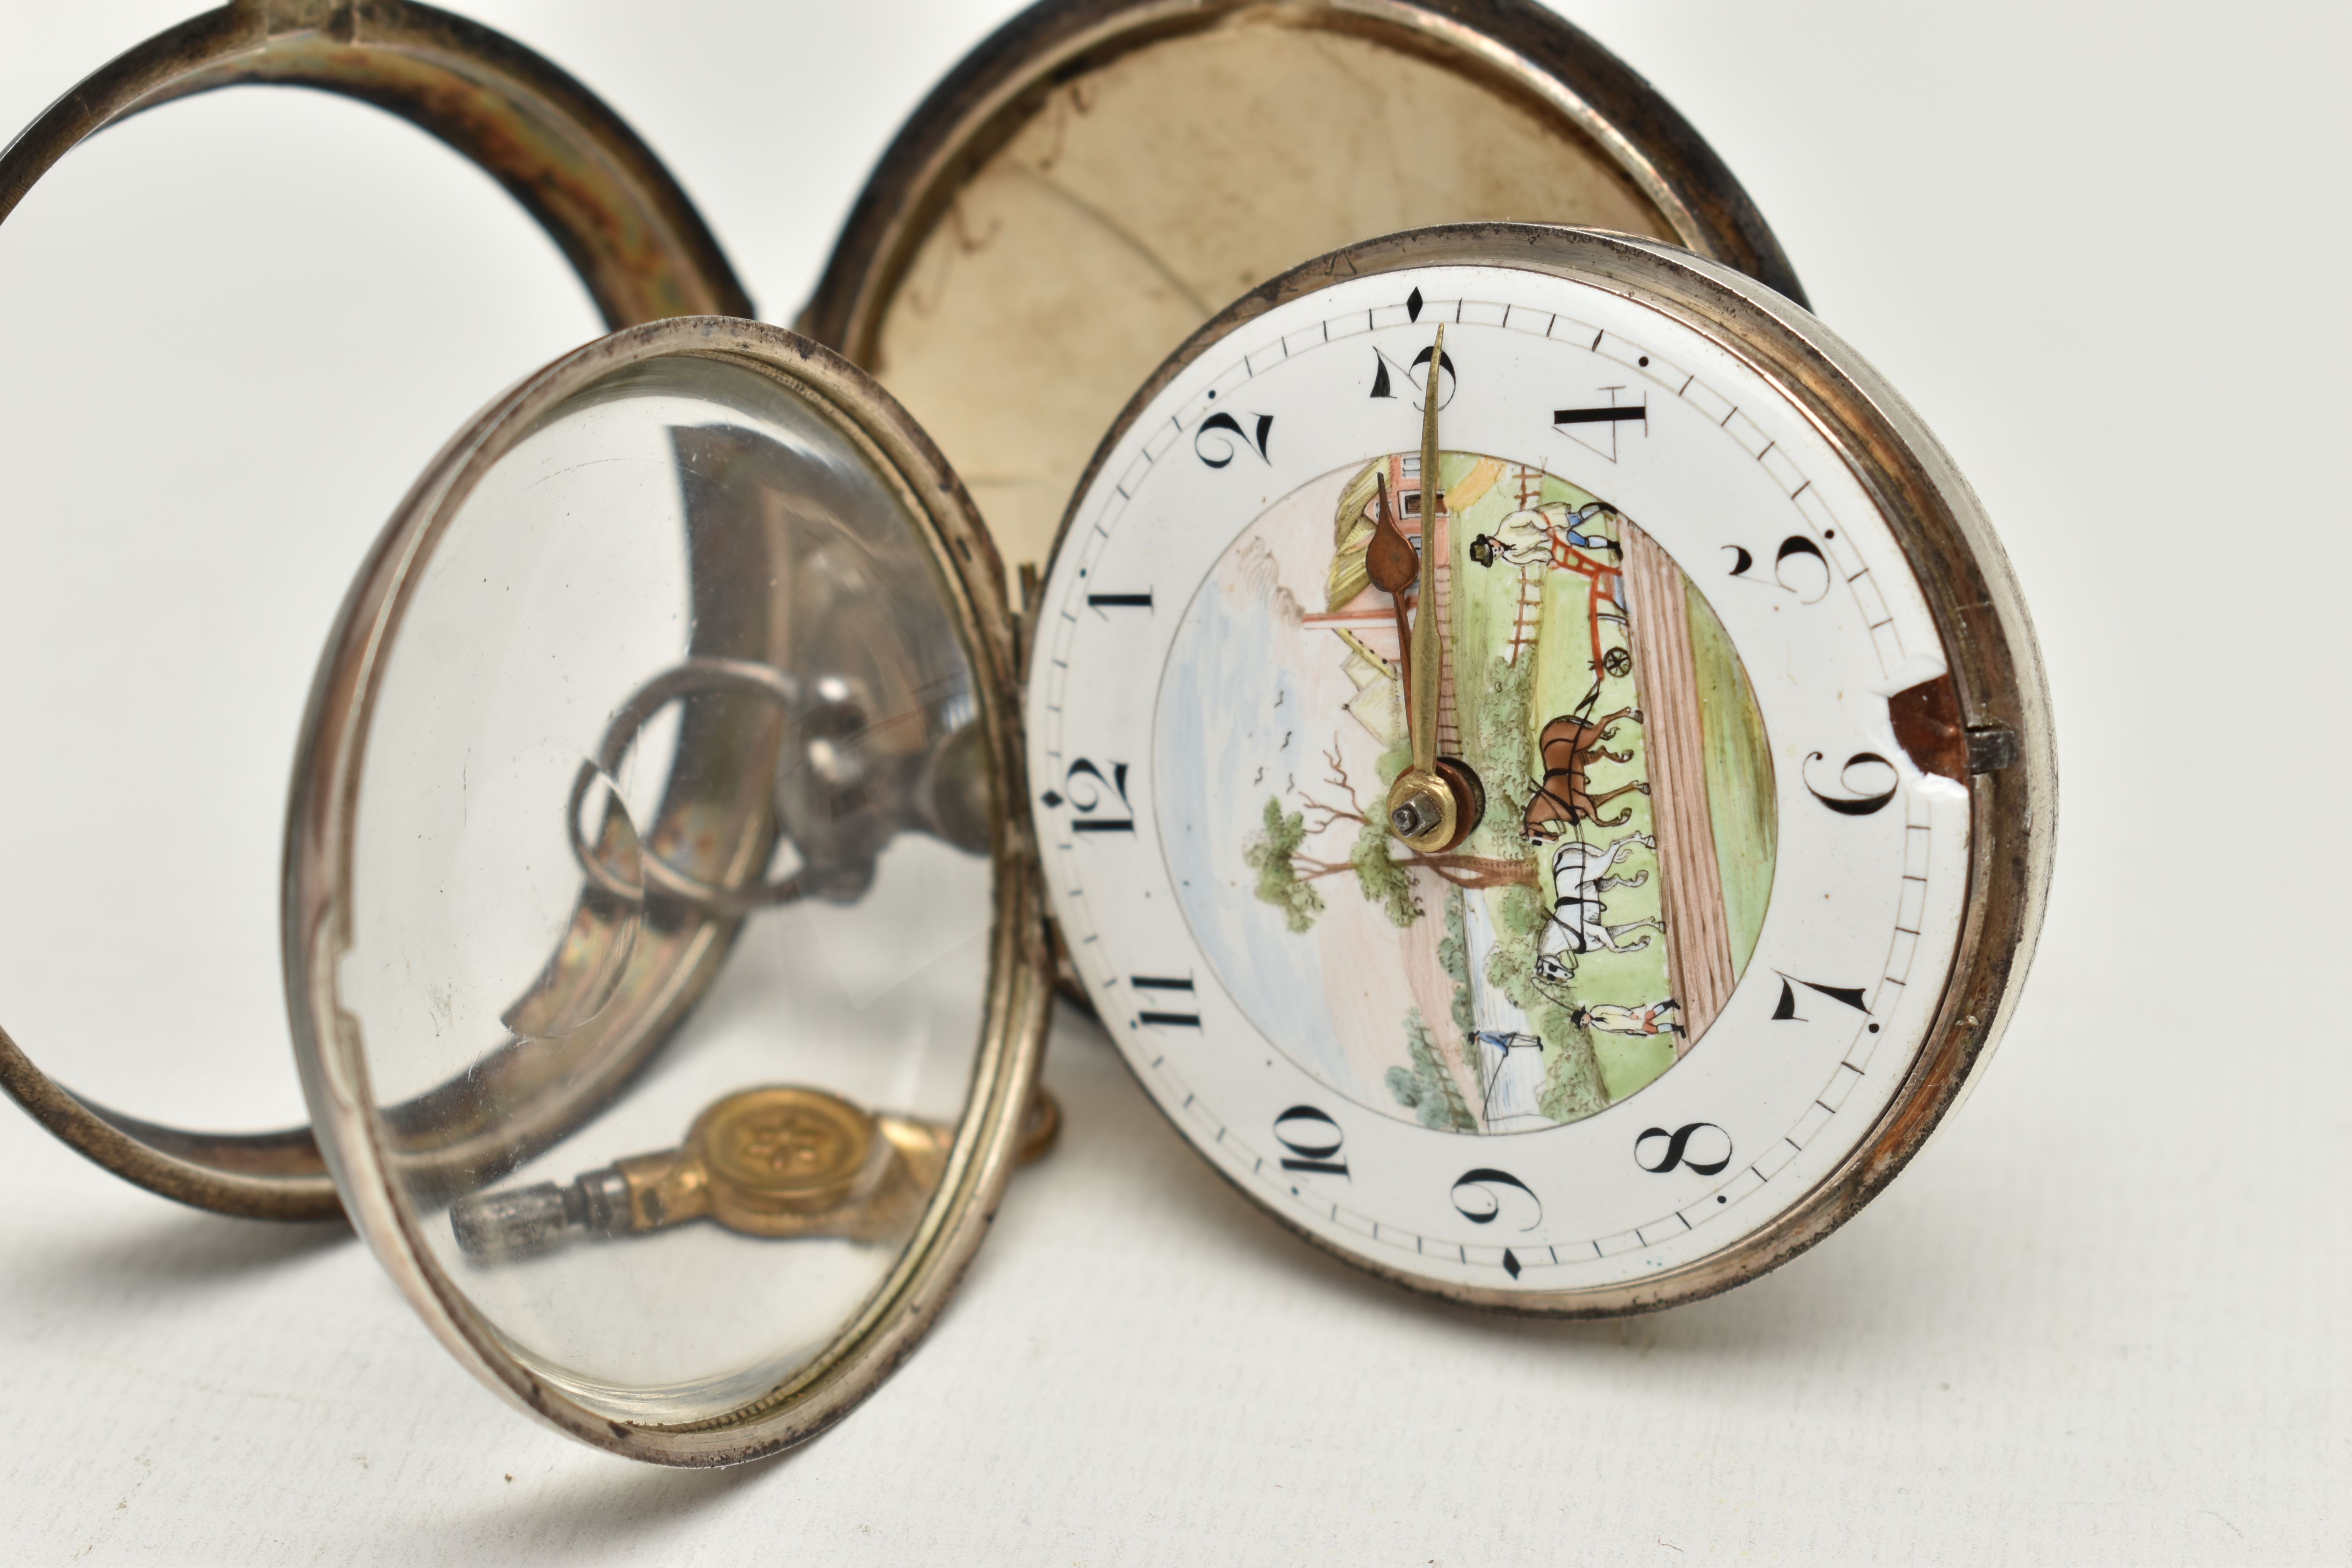 A GEORGE III SILVER PAIR CASED POCKET WATCH, the white enamel dial with Arabic numerals, painted - Image 6 of 9